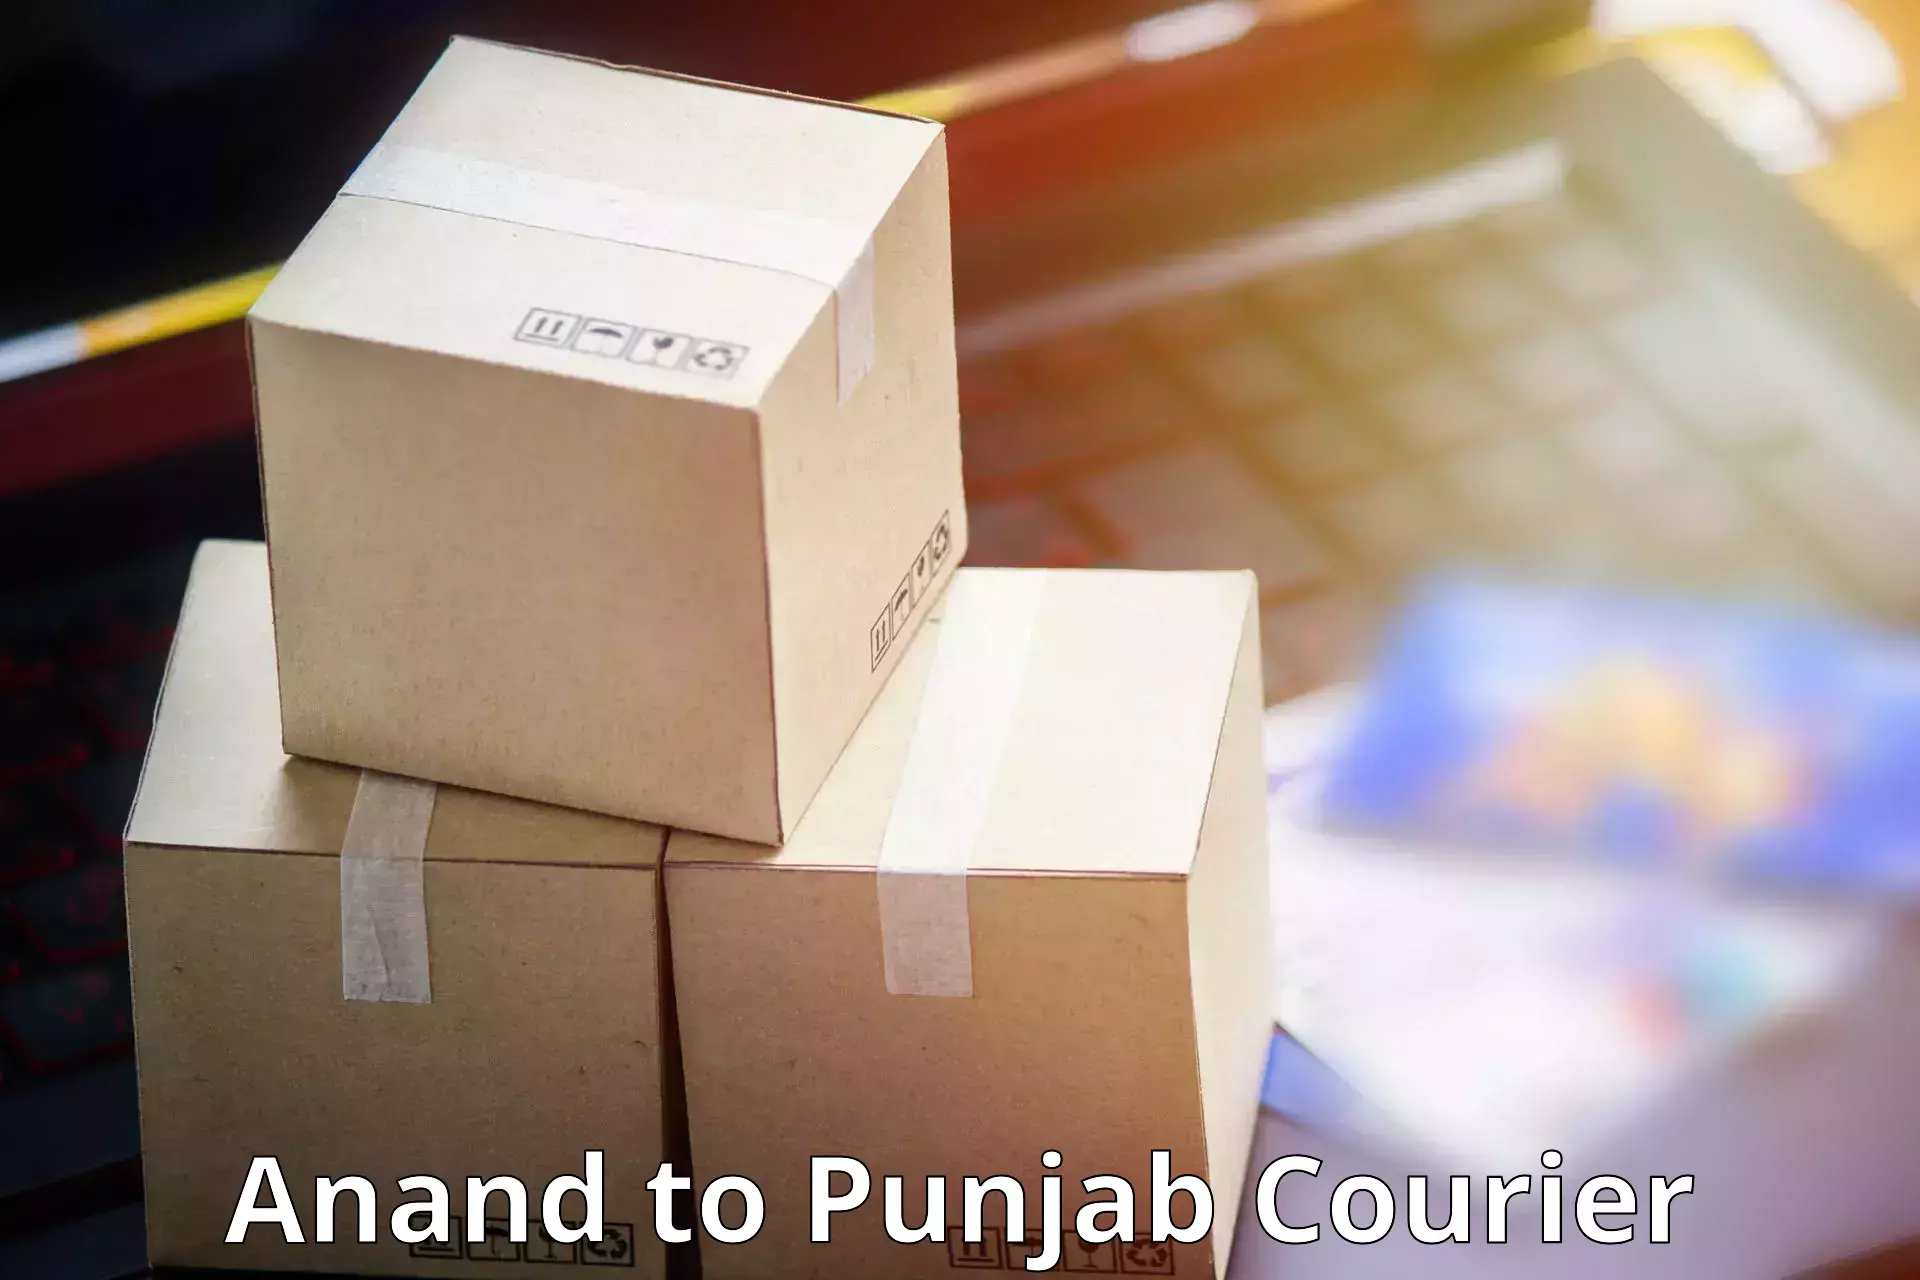 On-call courier service Anand to Ajnala